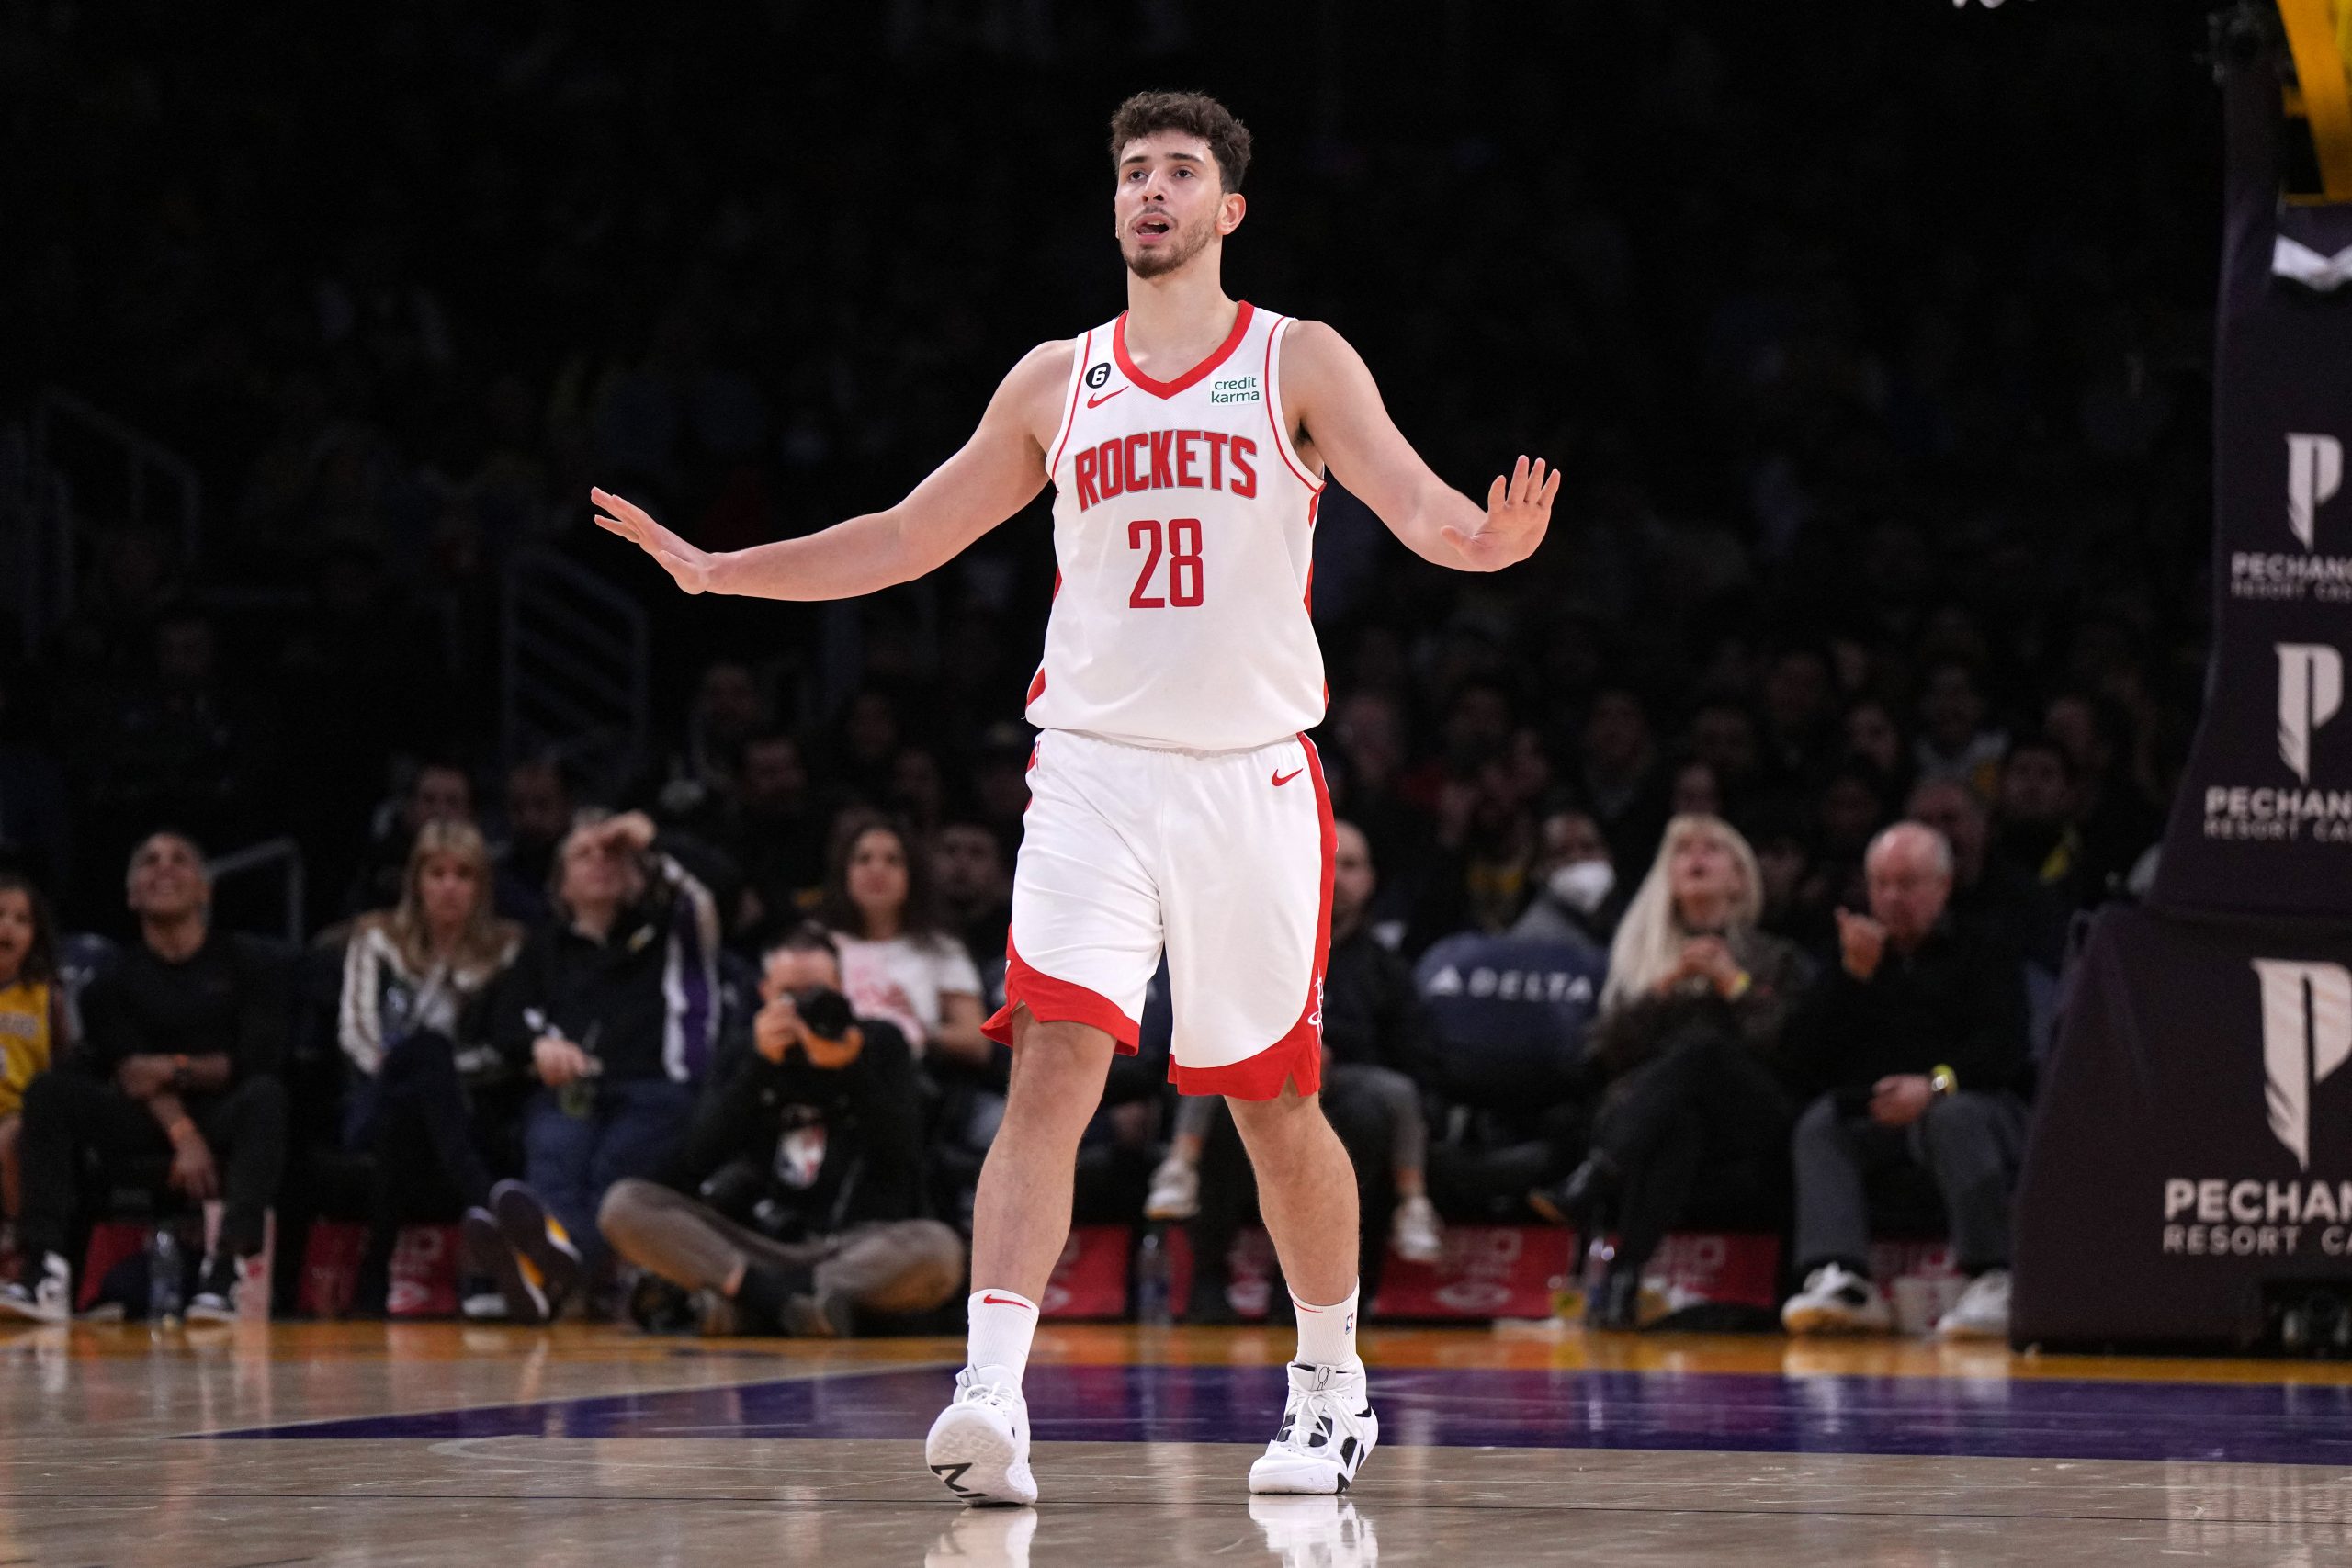 Jan 16, 2023; Los Angeles, California, USA; Houston Rockets center Alperen Sengun (28) reacts after a three-point basket against the Los Angeles Lakers in the first half at Crypto.com Arena. Mandatory Credit: Kirby Lee-USA TODAY Sports Photo: Kirby Lee/REUTERS